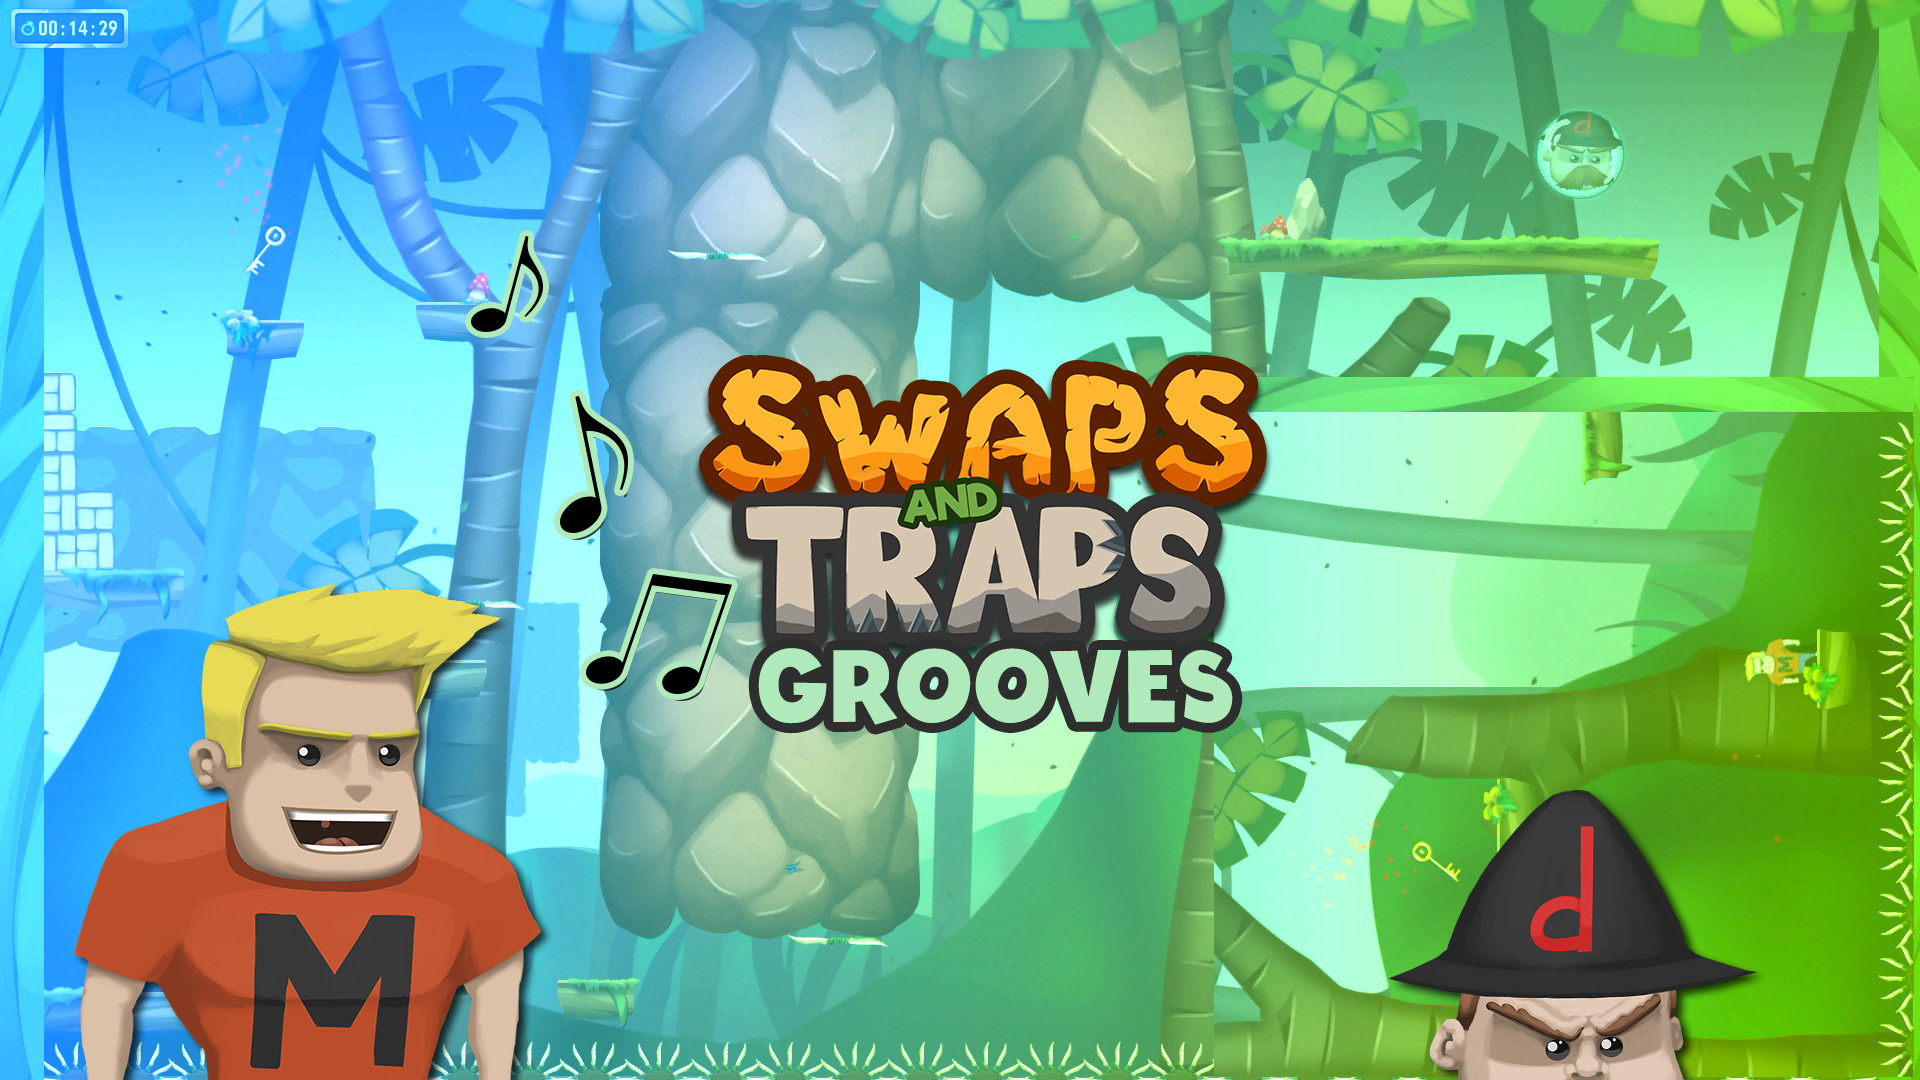 Swaps and Traps Grooves (Original Soundtrack) Featured Screenshot #1